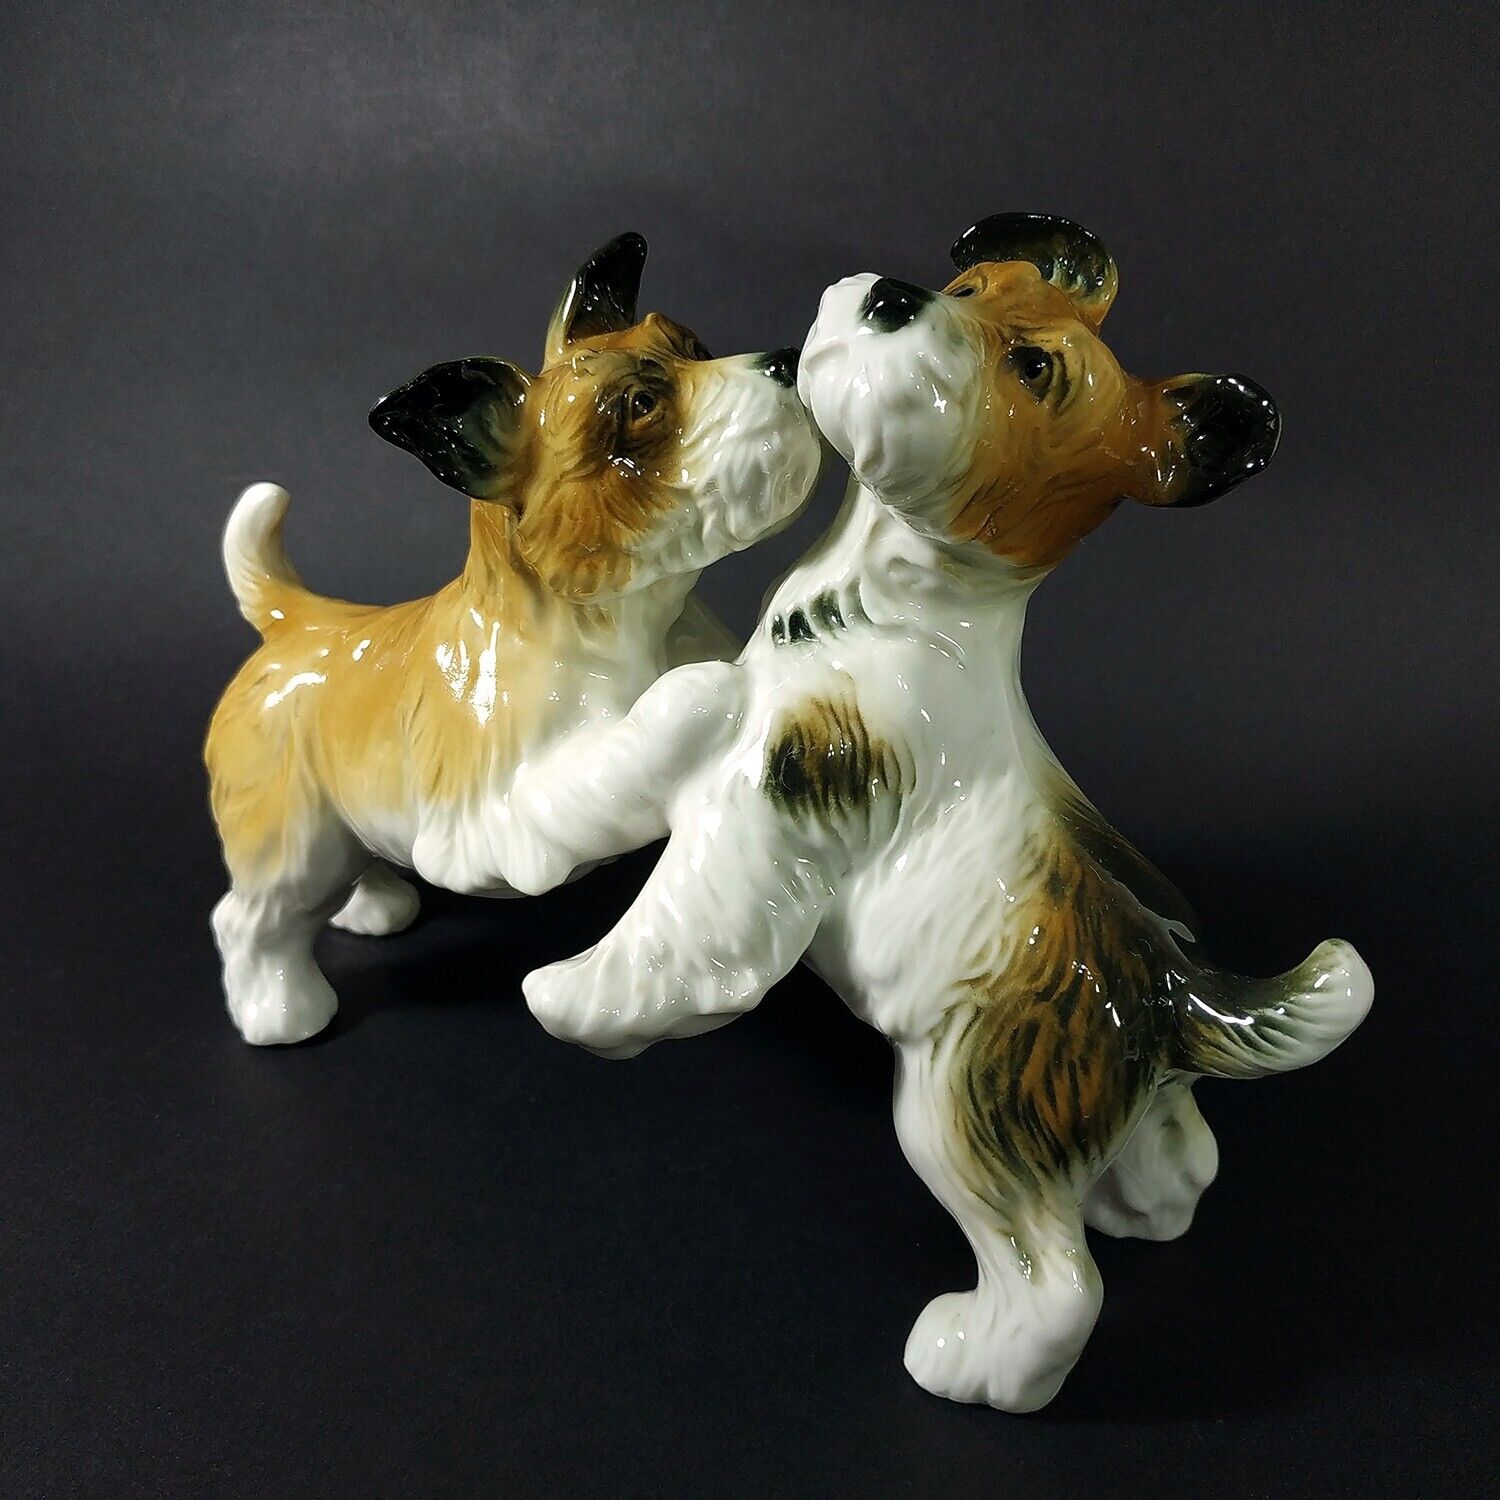 KARL ENS © Germany. Playing Dogs. Antique Porcelain Figurine. 1919 -1945